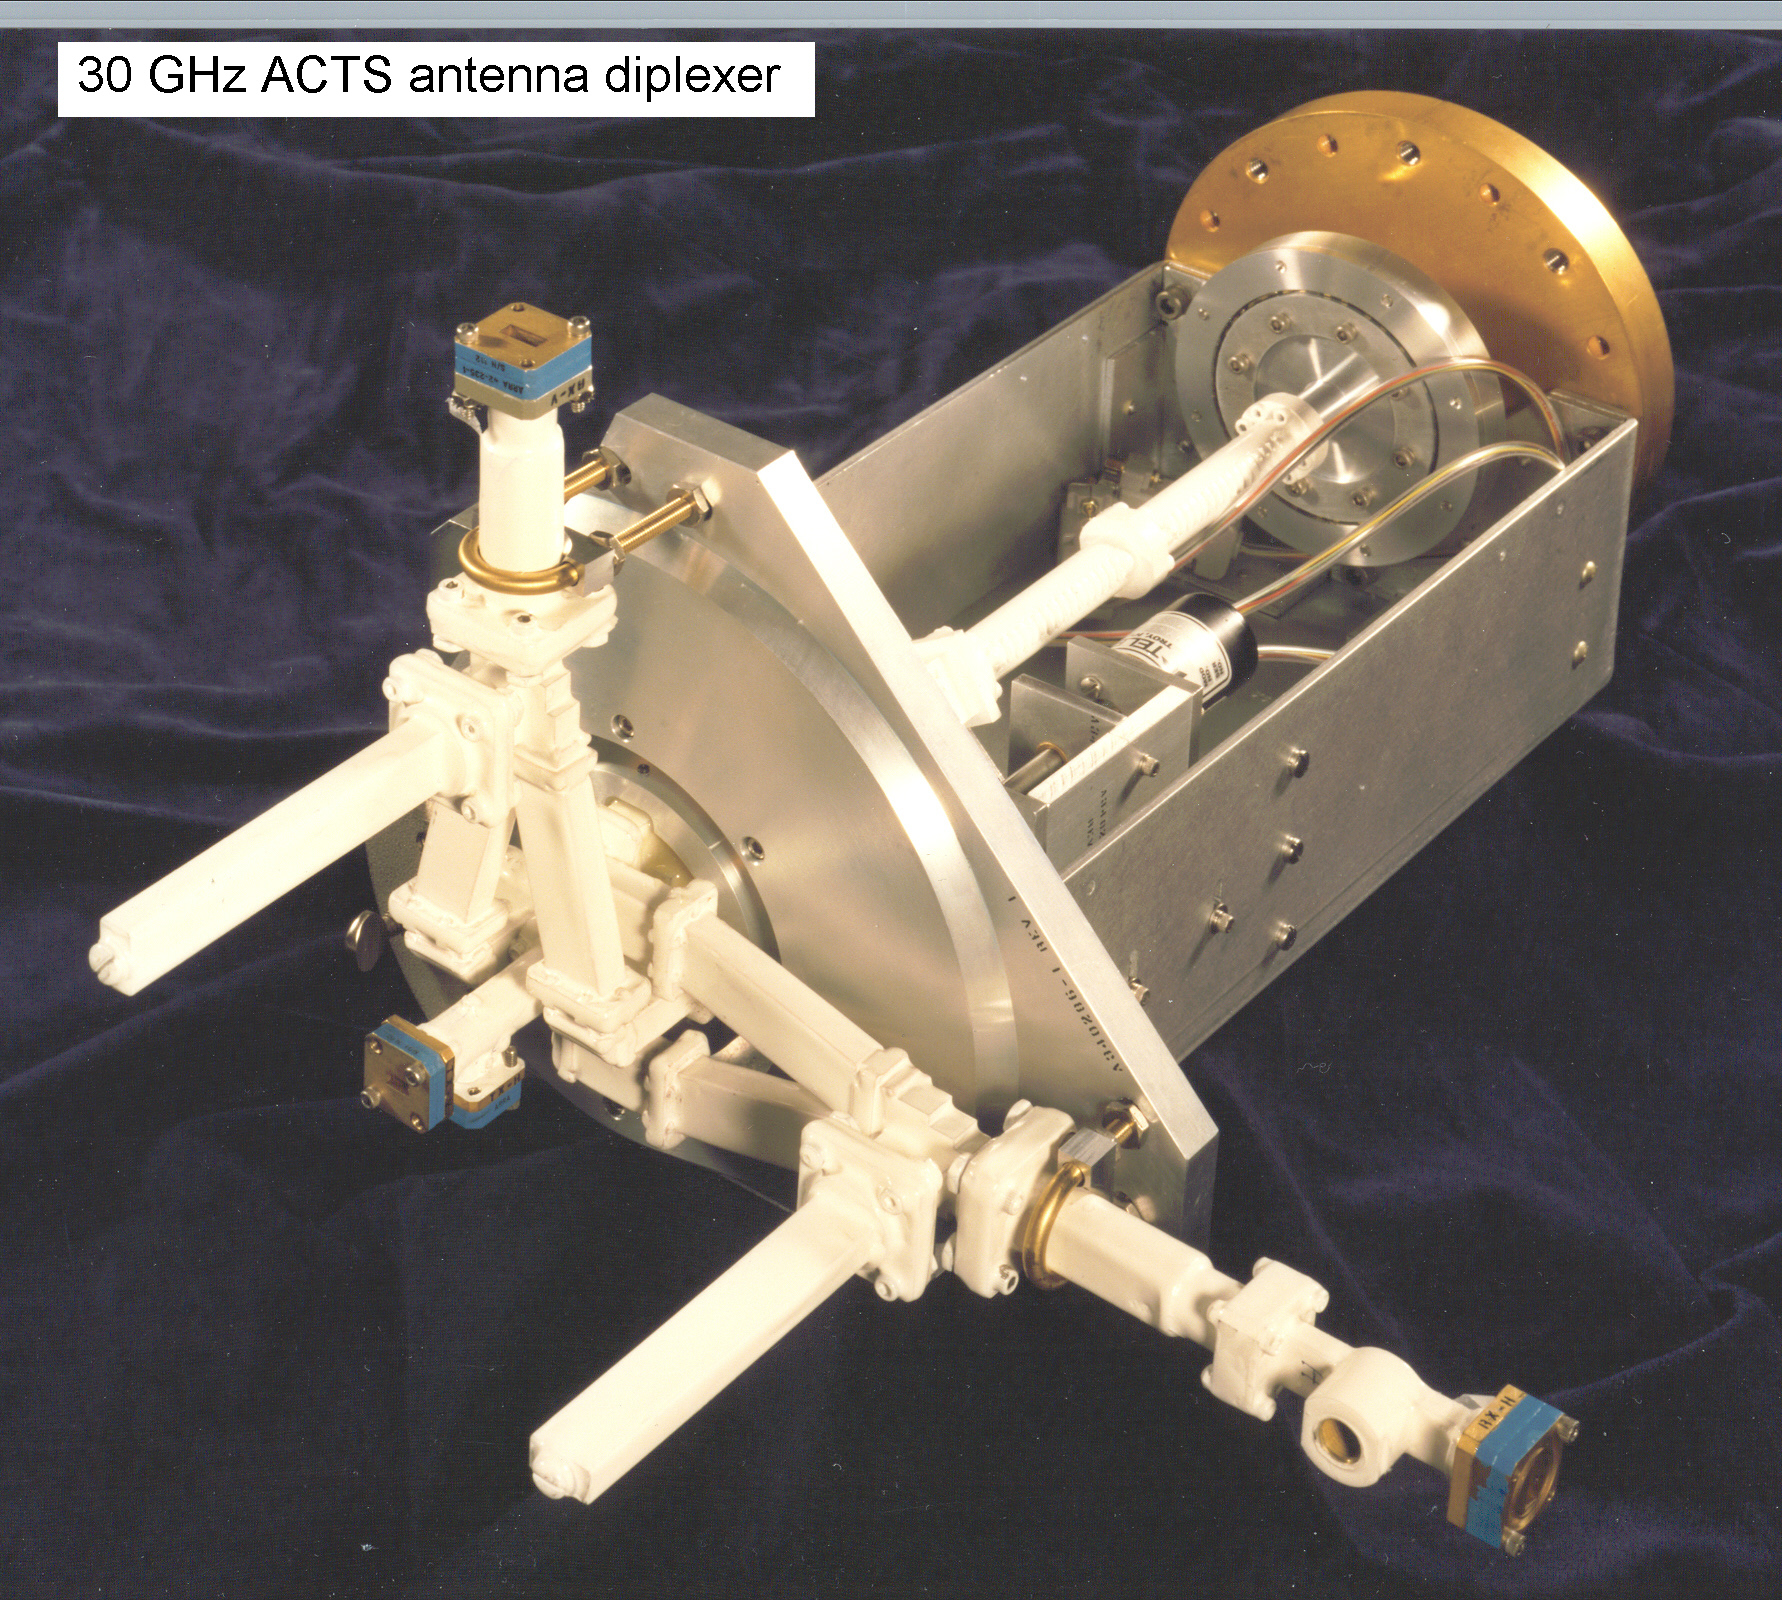 K_band_antenna_diplexer_for_NASA_ACTS_Earth_Station_Advanced_Comms_Technology_Satellite_program_910411CH3.jpg